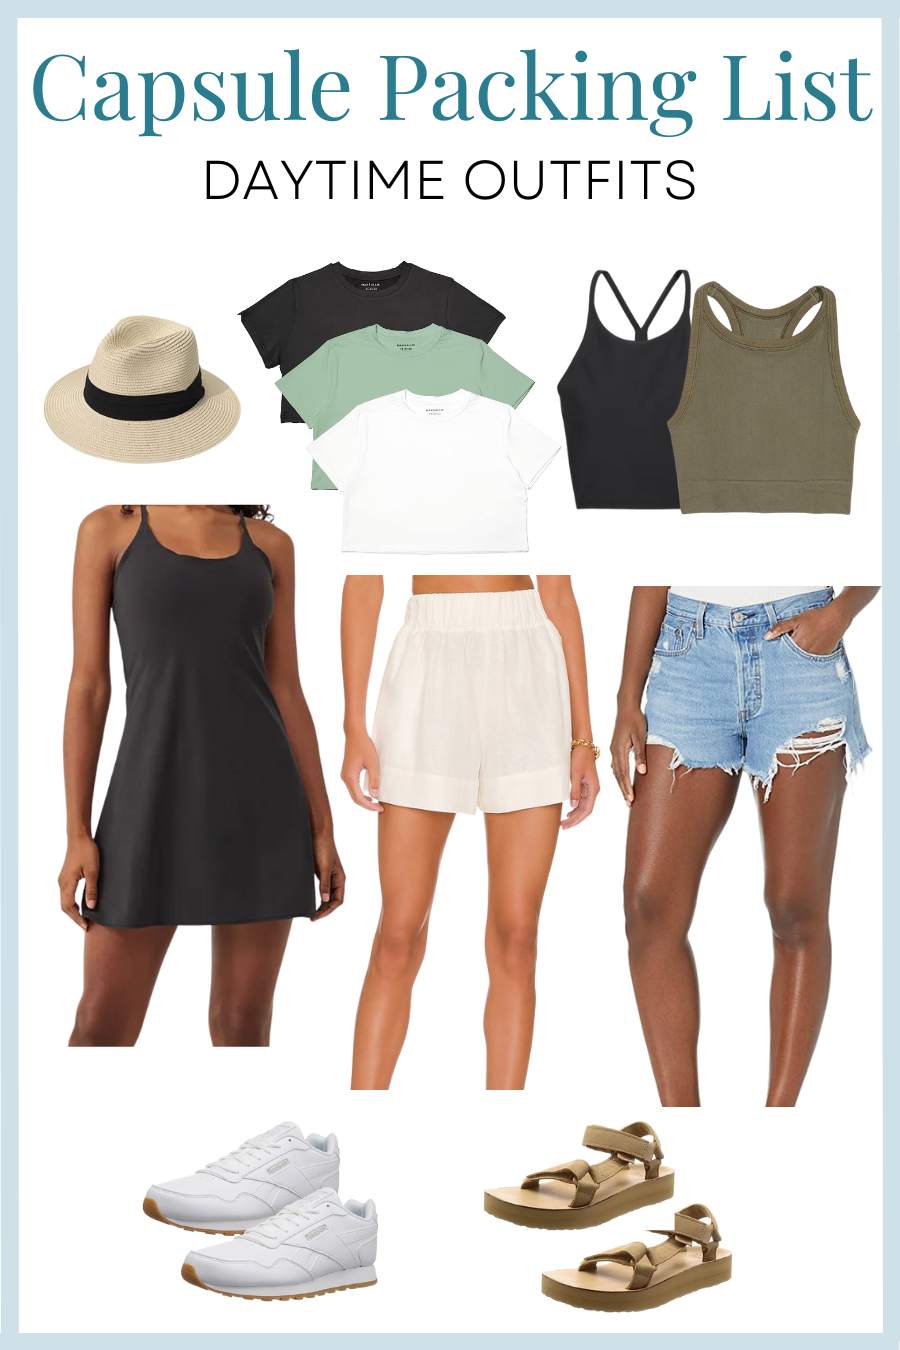 Summer capsule packing list daytime outfit